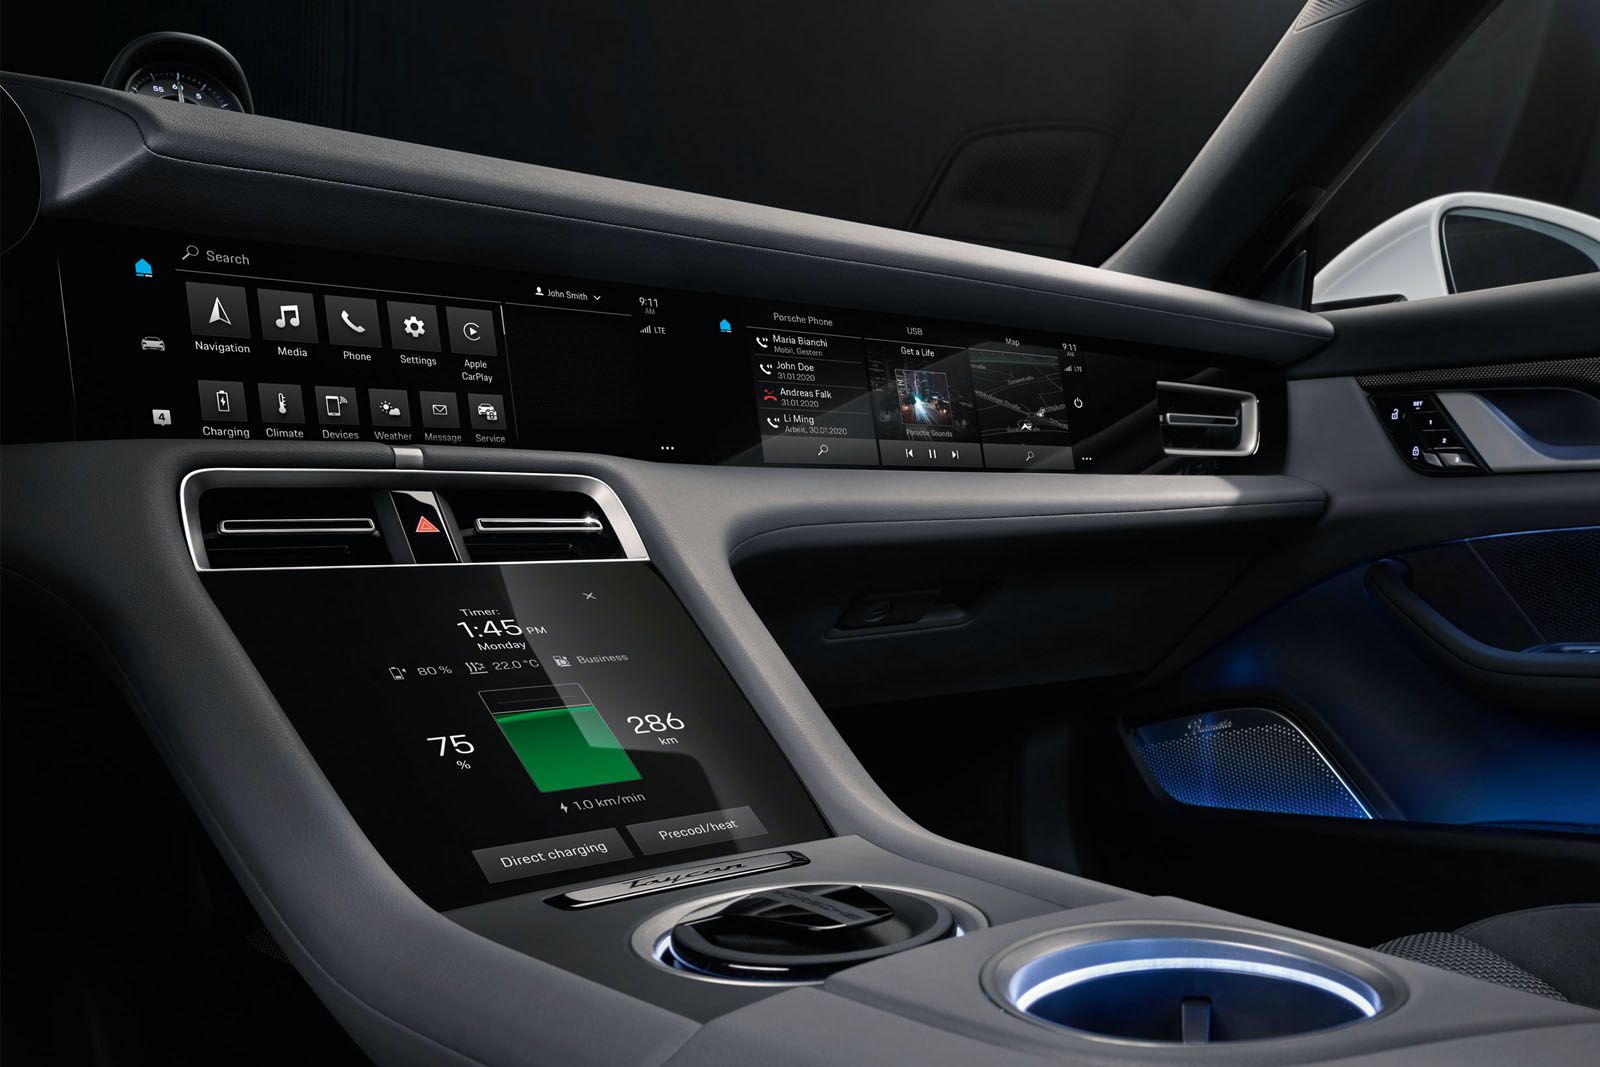 All-electric Porsche Taycan features a fabulous fully digital dashboard image 1